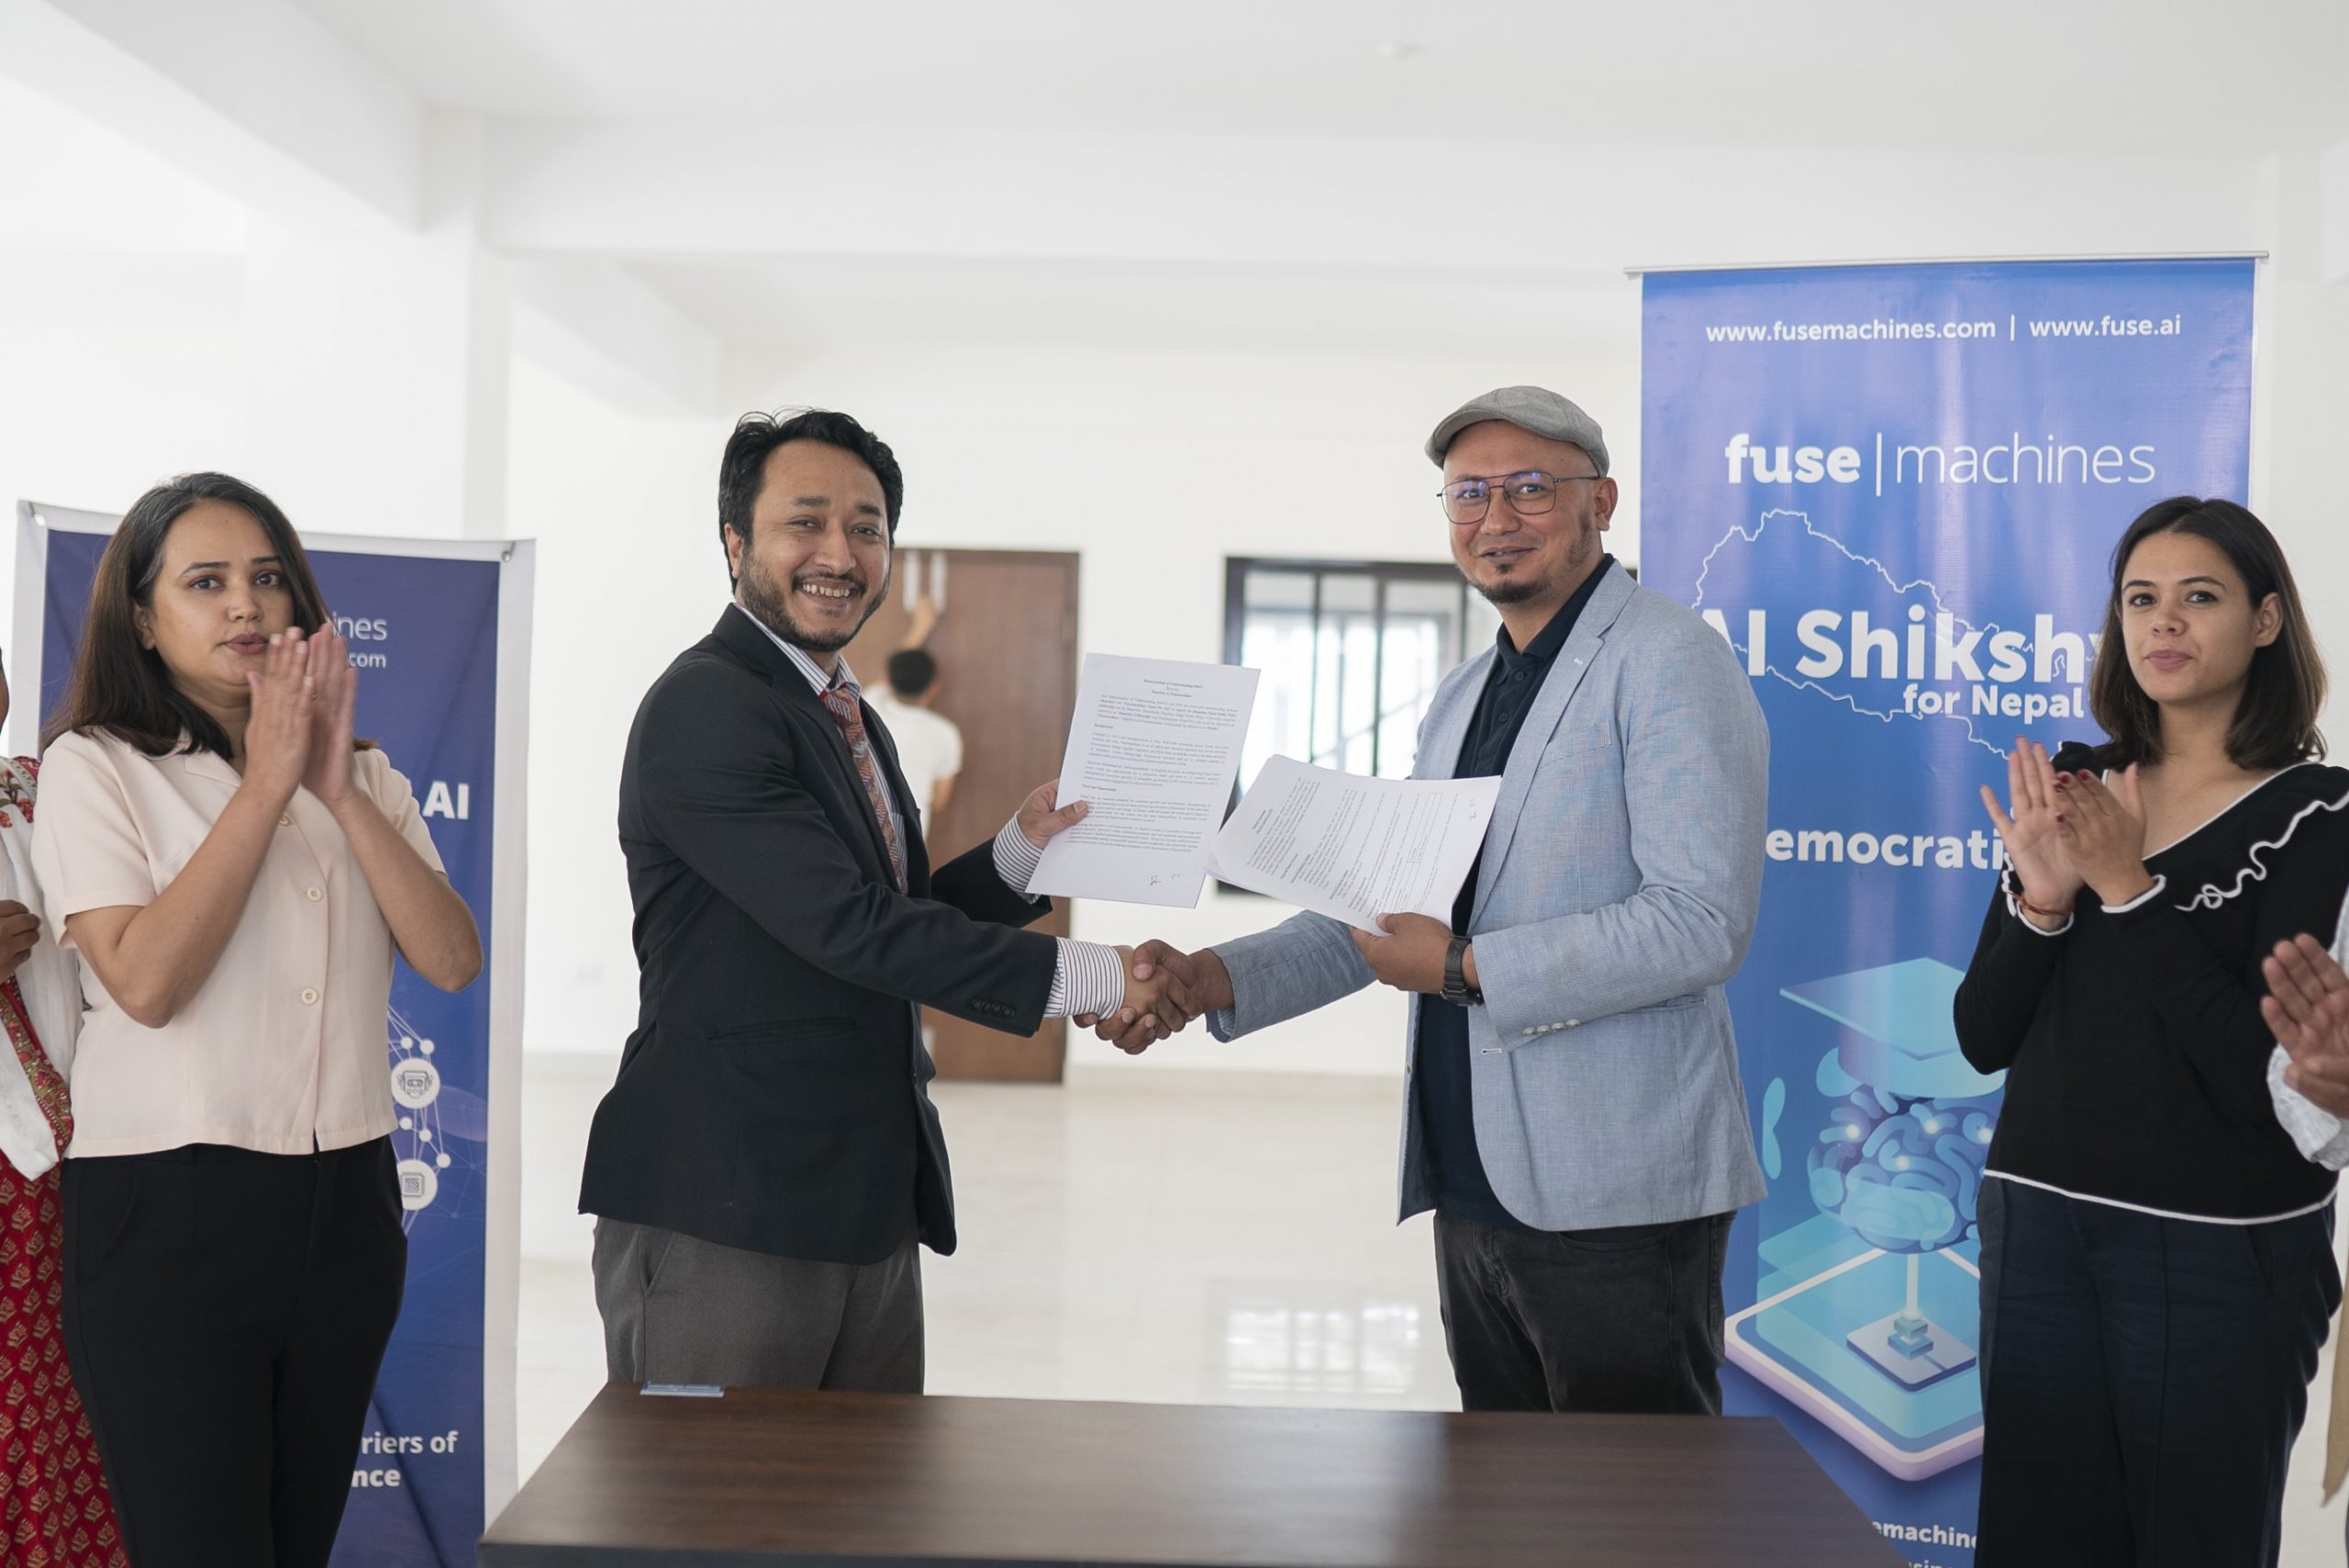 Fusemachines, an AI talent and education platform and service provider, and Daayitwa, an NGO active in policy reforms, sign a partnership agreement, in Kathmandu, on Tuesday, March 29, 2022. Photo: Fusemachines